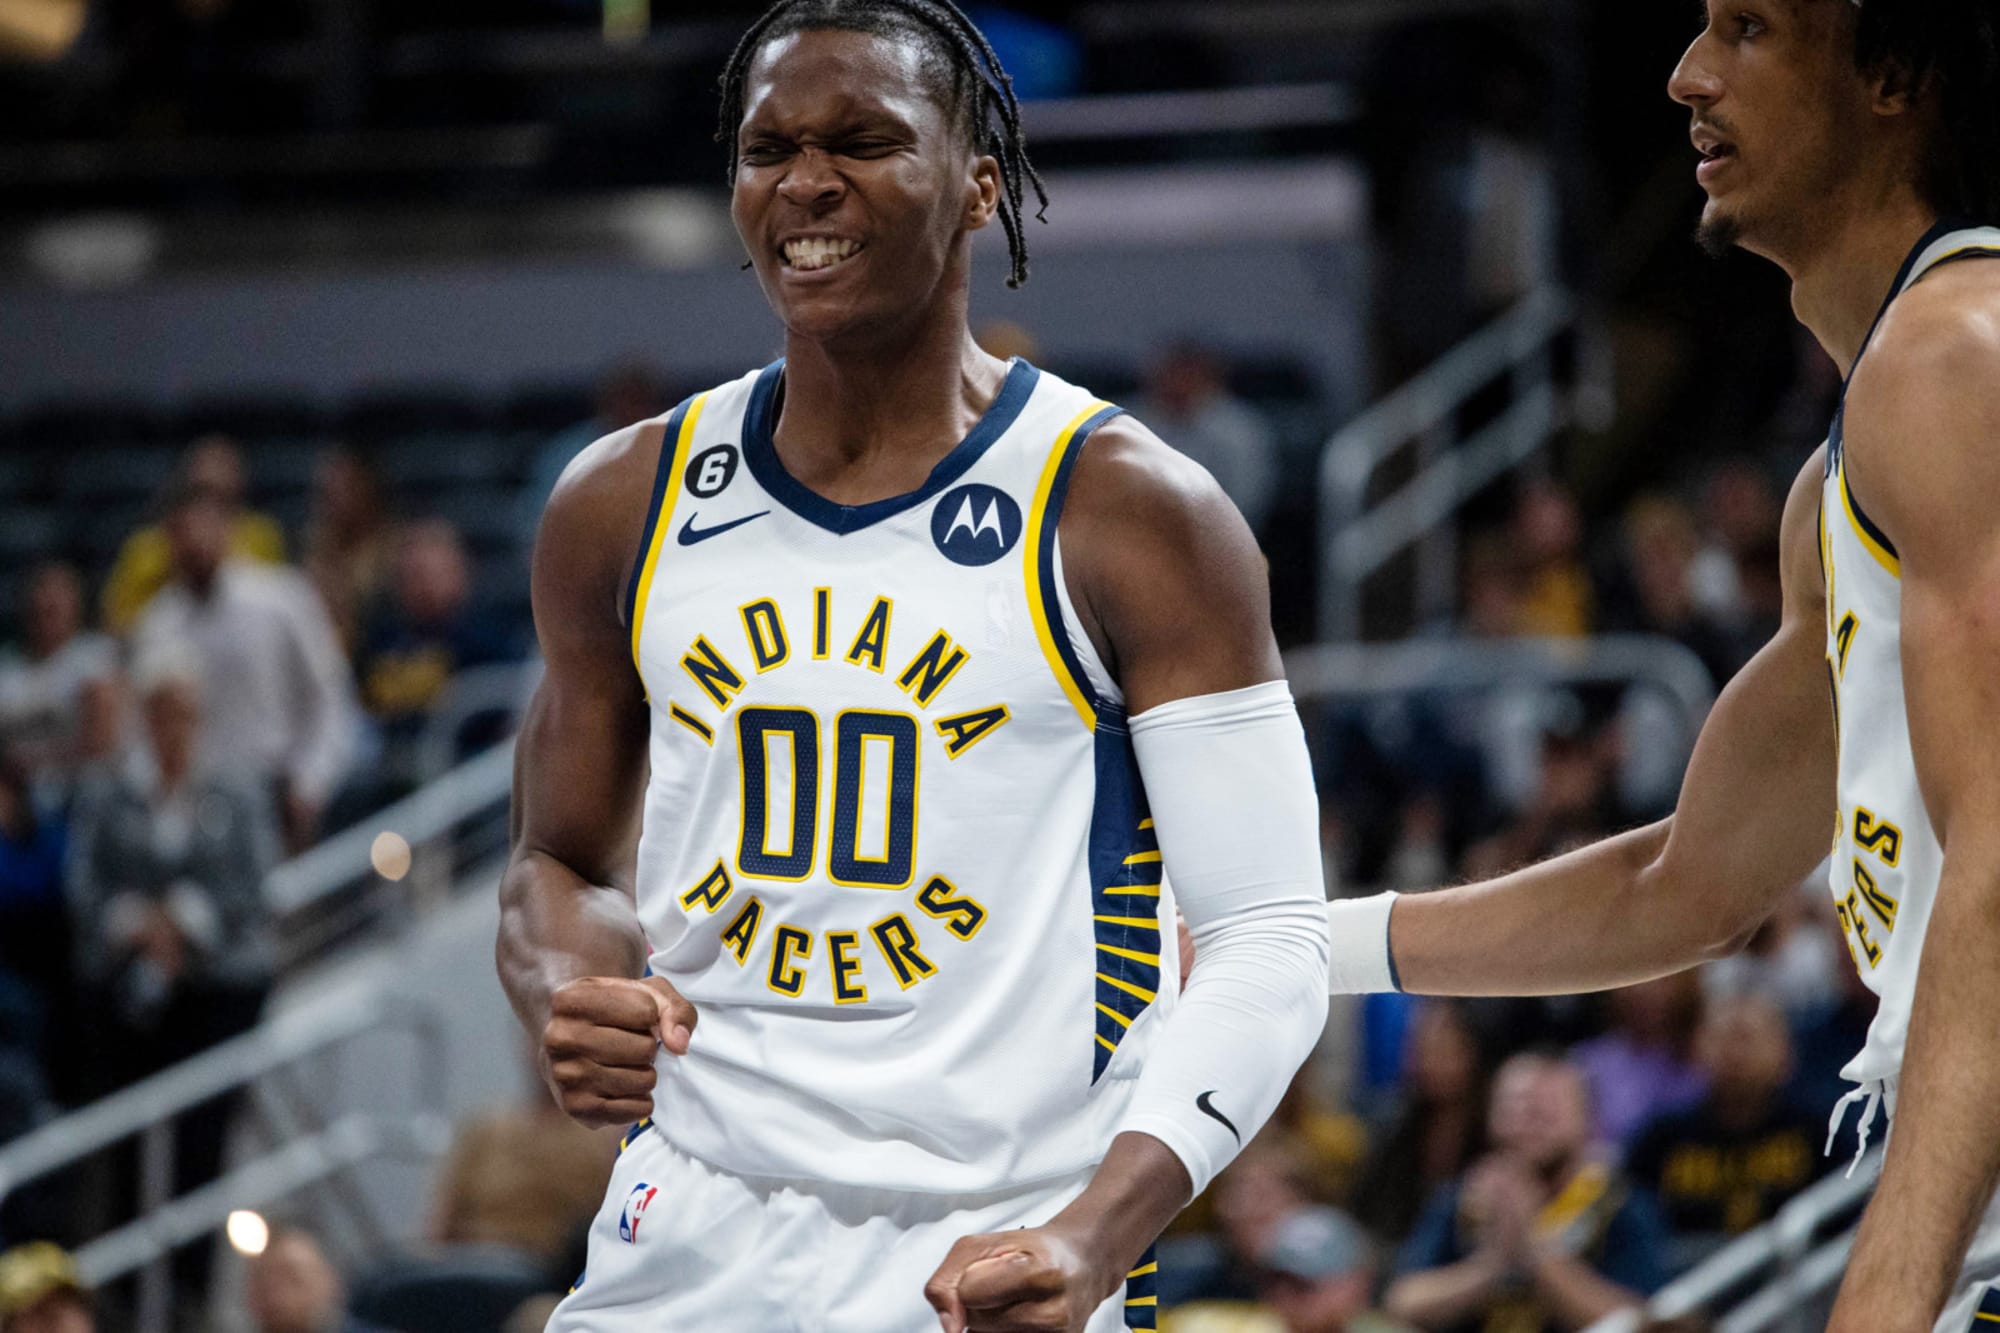 Pacers rookie Bennedict Mathurin is on pace to set unparalleled NBA